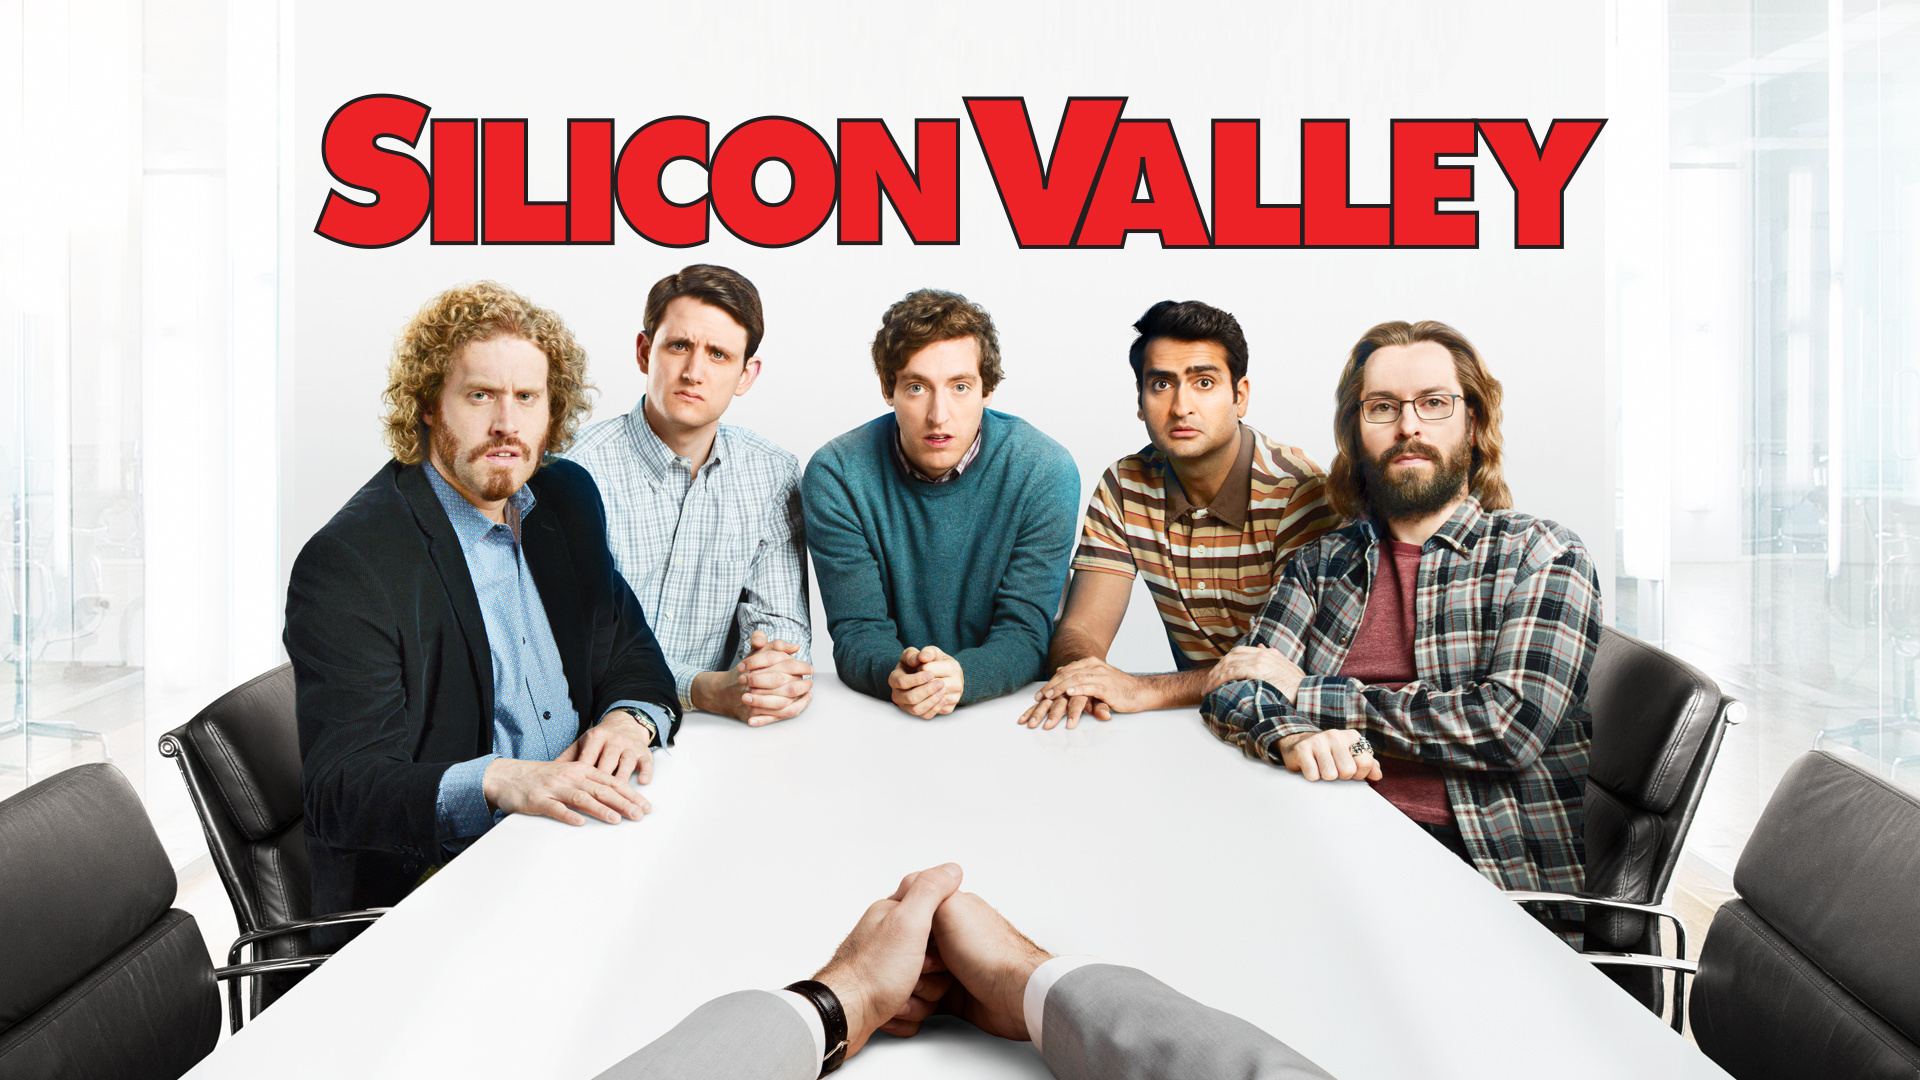 Silicon Valley streaming, Watch or stream, Tech industry comedy, HBO series, 1920x1080 Full HD Desktop